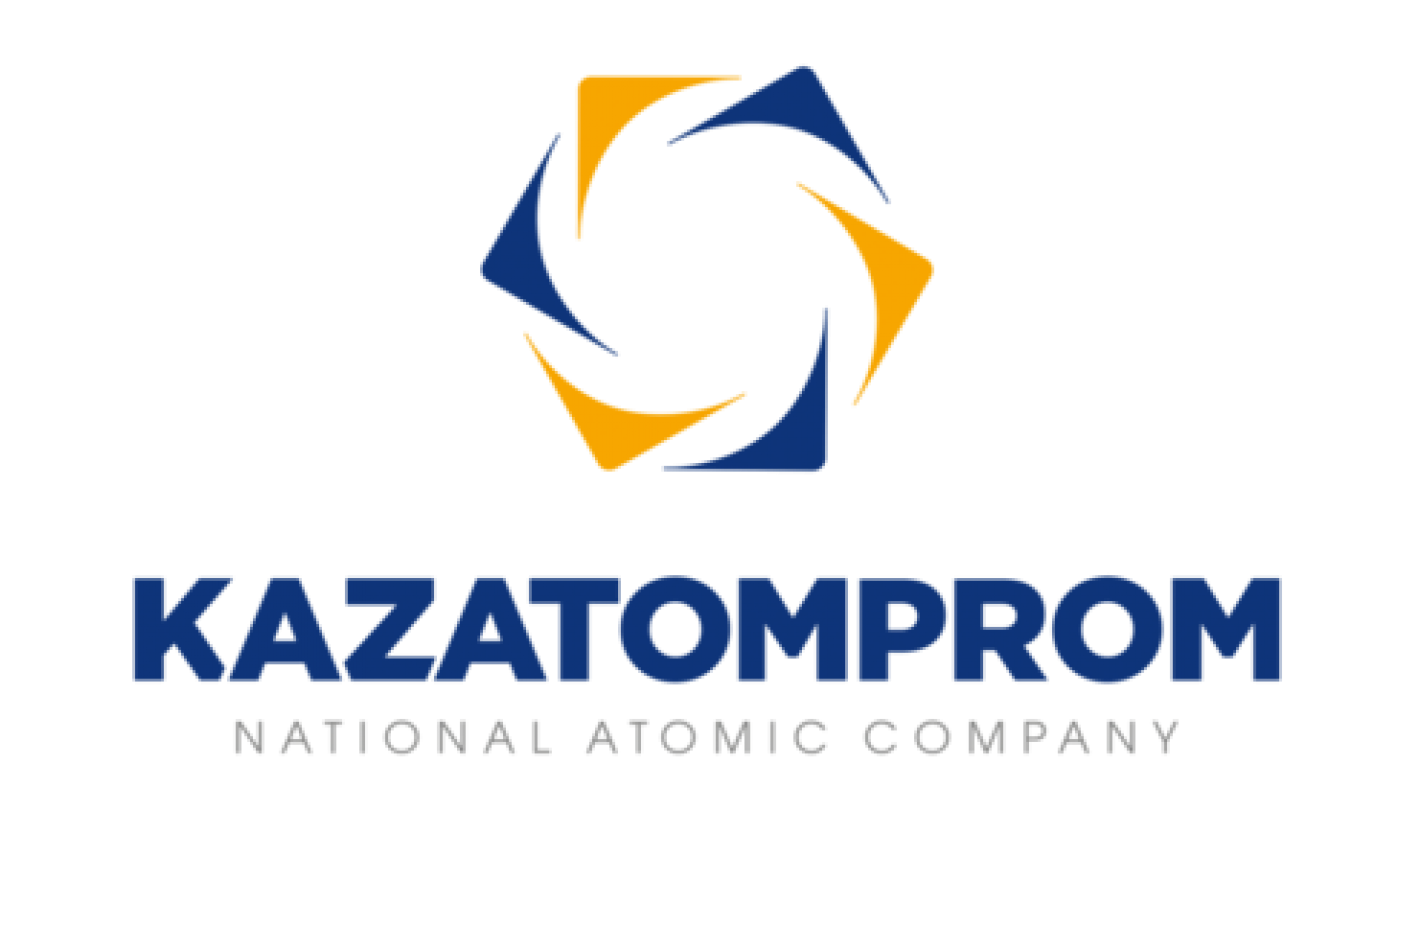 Kazatomprom completes the acquisition of a 40.05% share in Energy Asia (BVI) Limited and 16.02% in JV “Khorasan-U” LLP